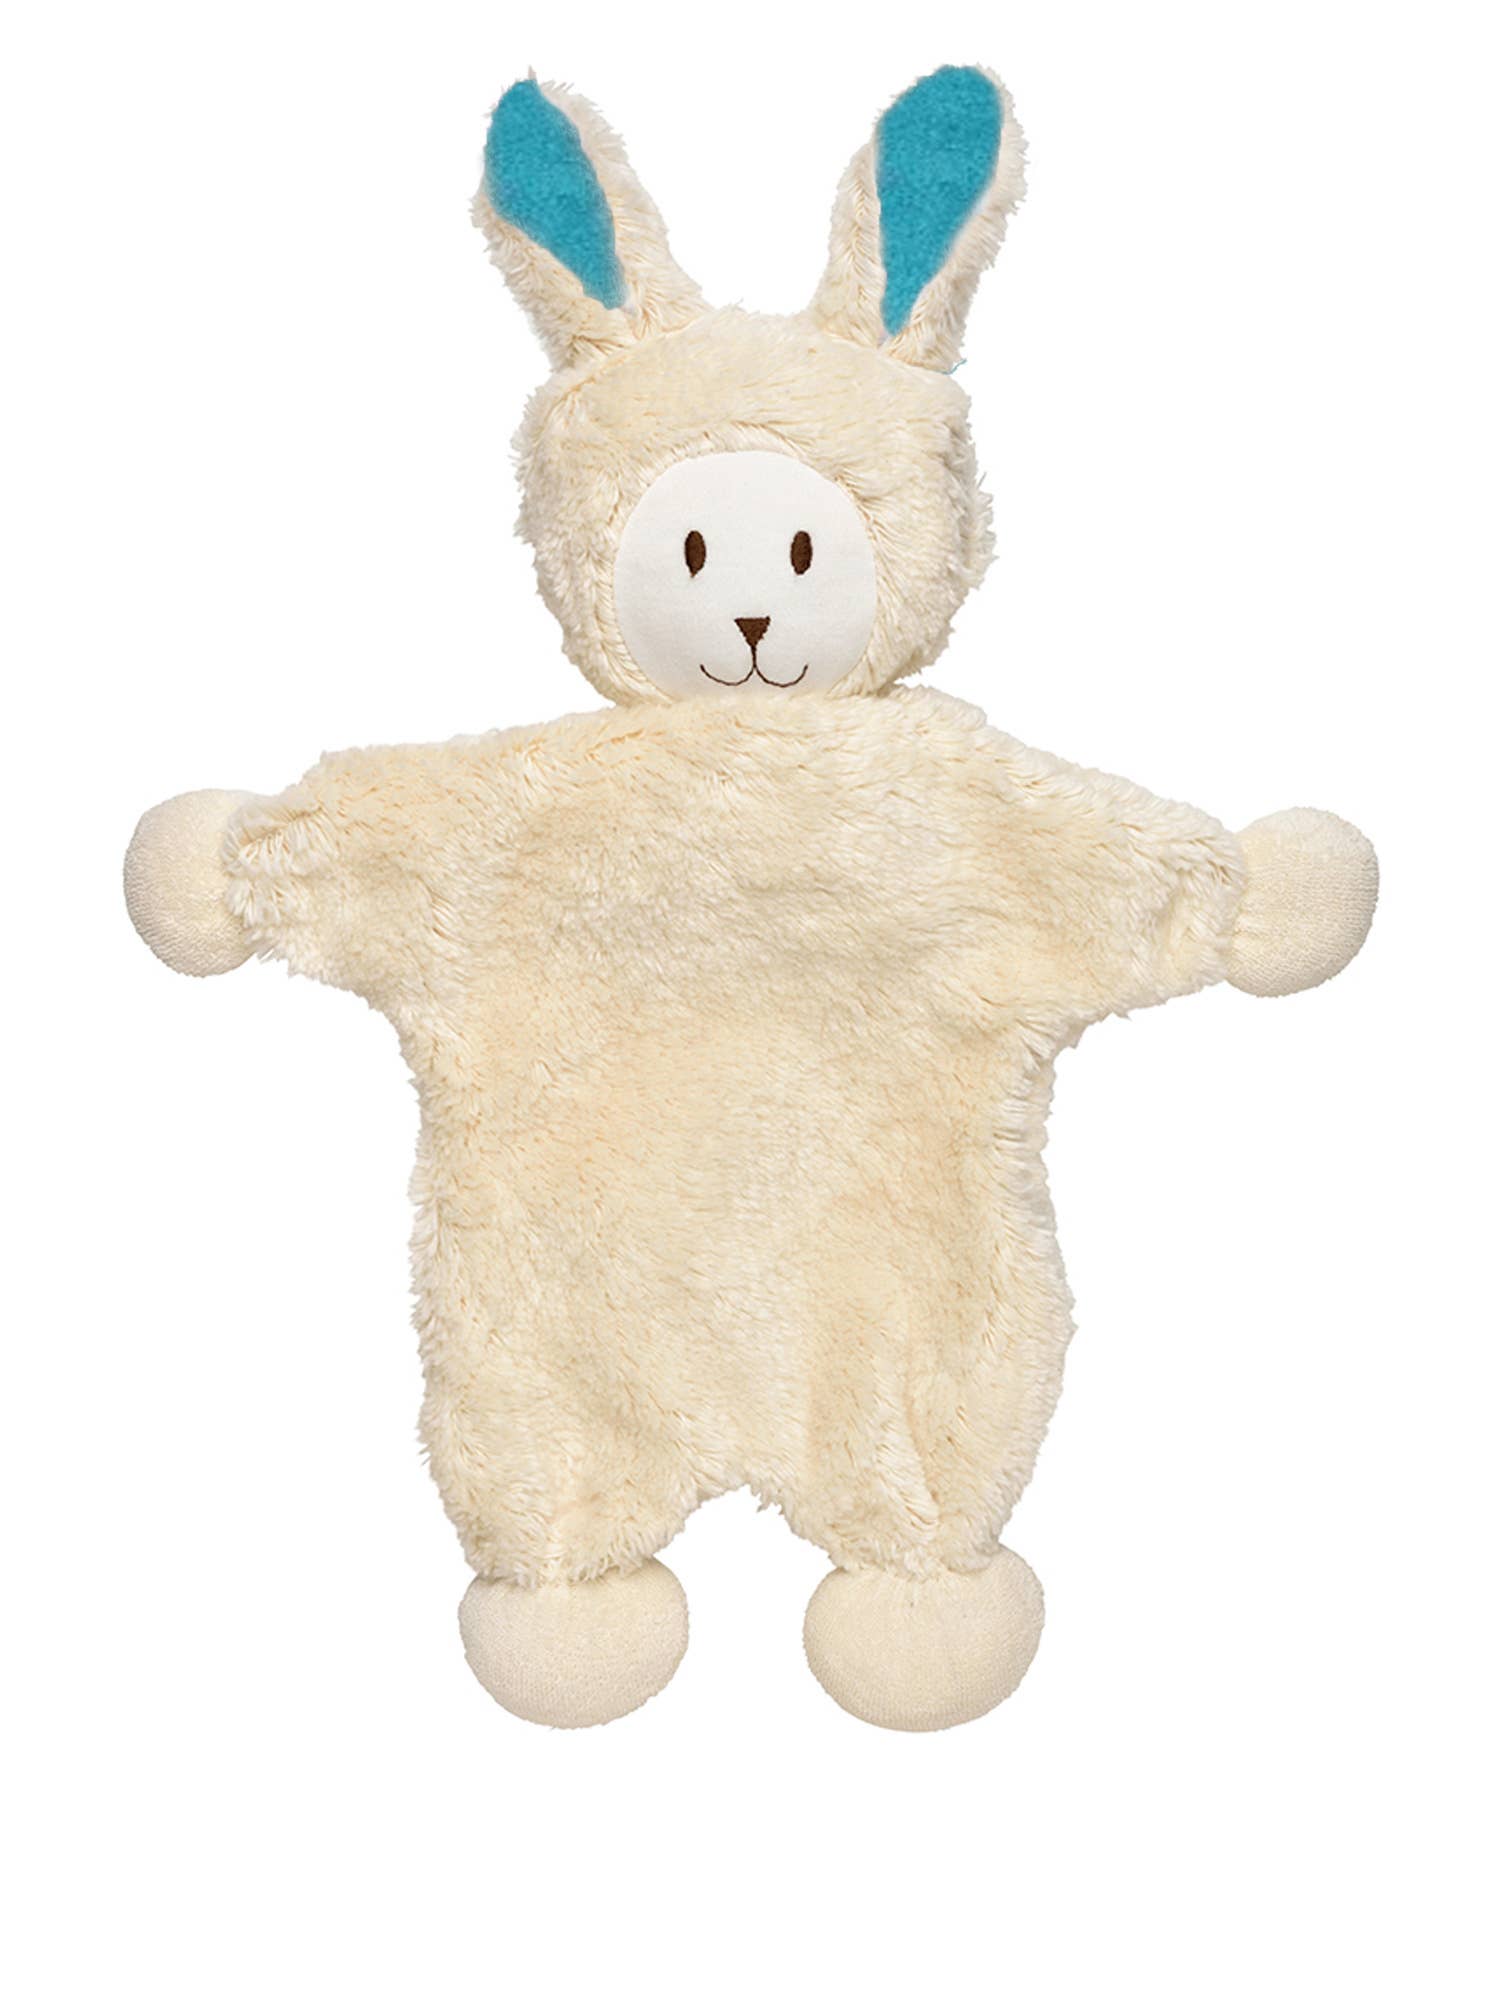 Snuggle Bunny Toy - Turquoise Blue Ears - Organic Boutique